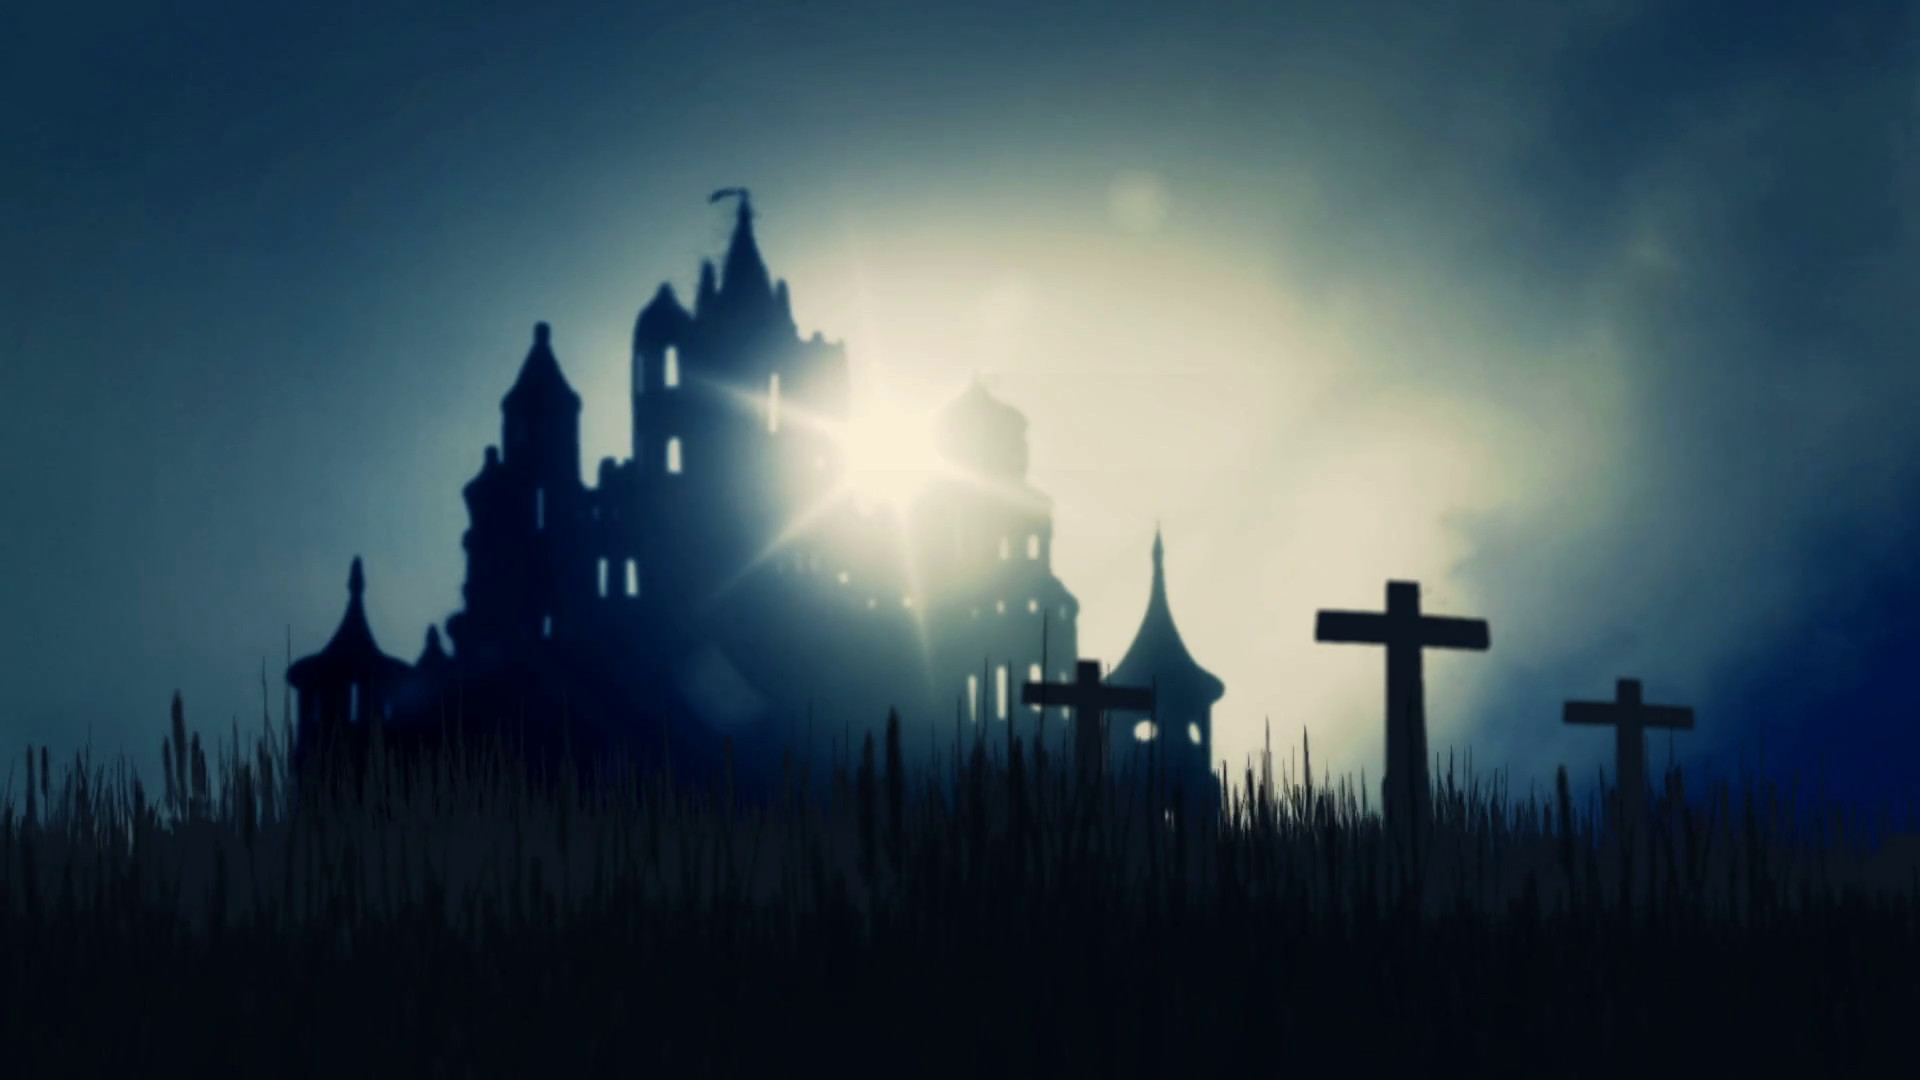 1920x1080 3 Wooden Crosses Burning On A Scary Castle Background